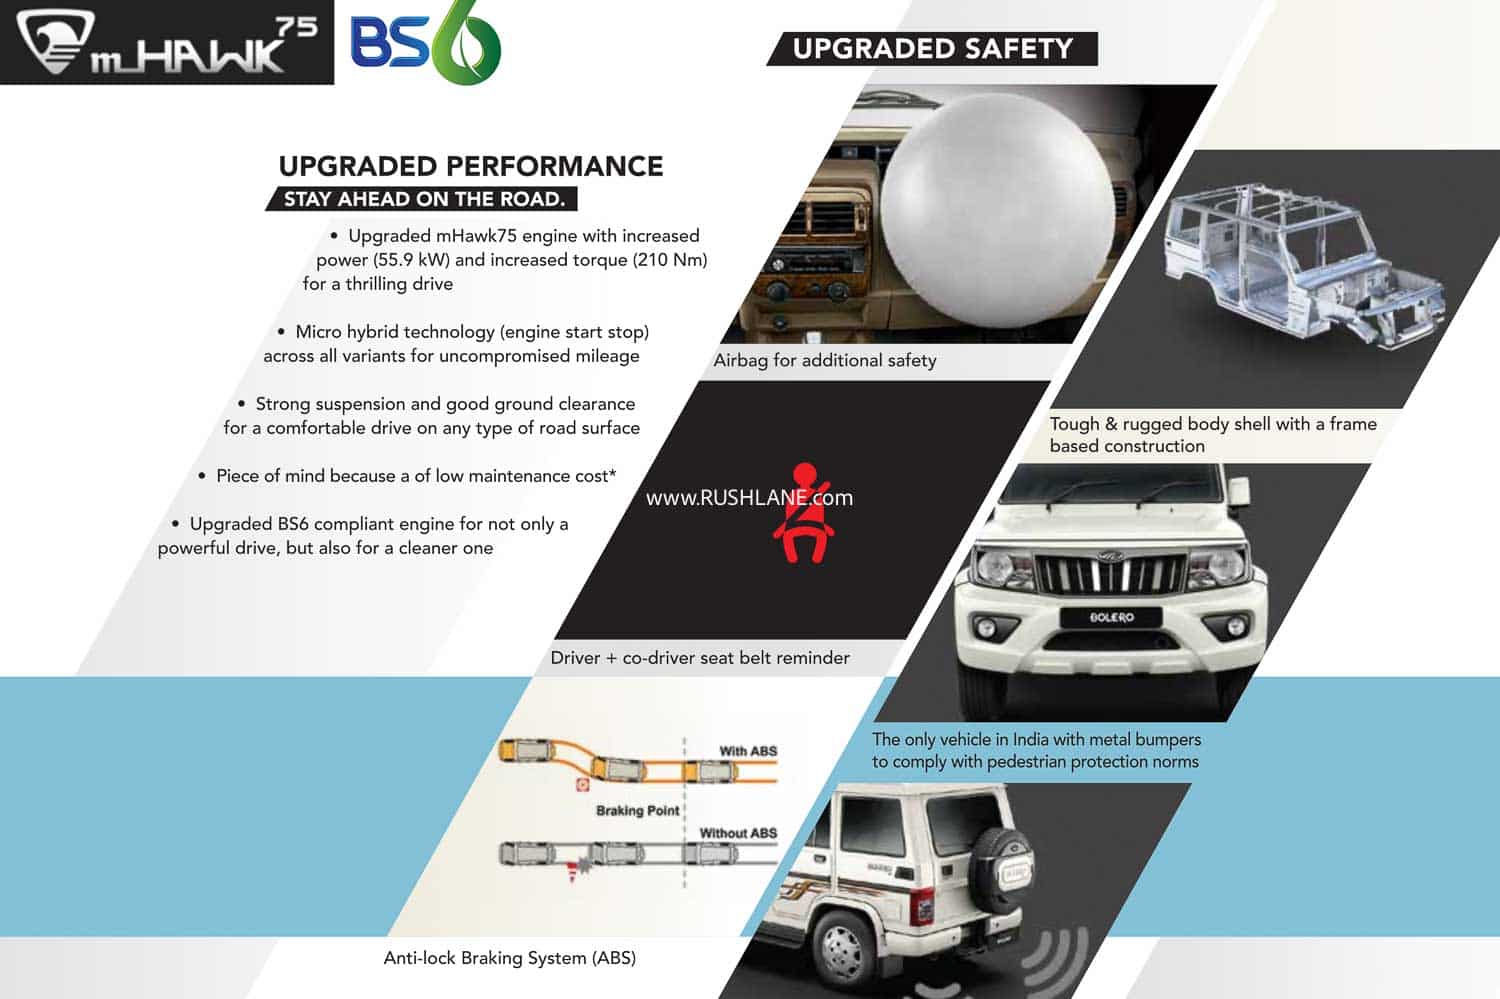 2020 Mahindra Bolero BS6 Launched - More Safety, Power, Features